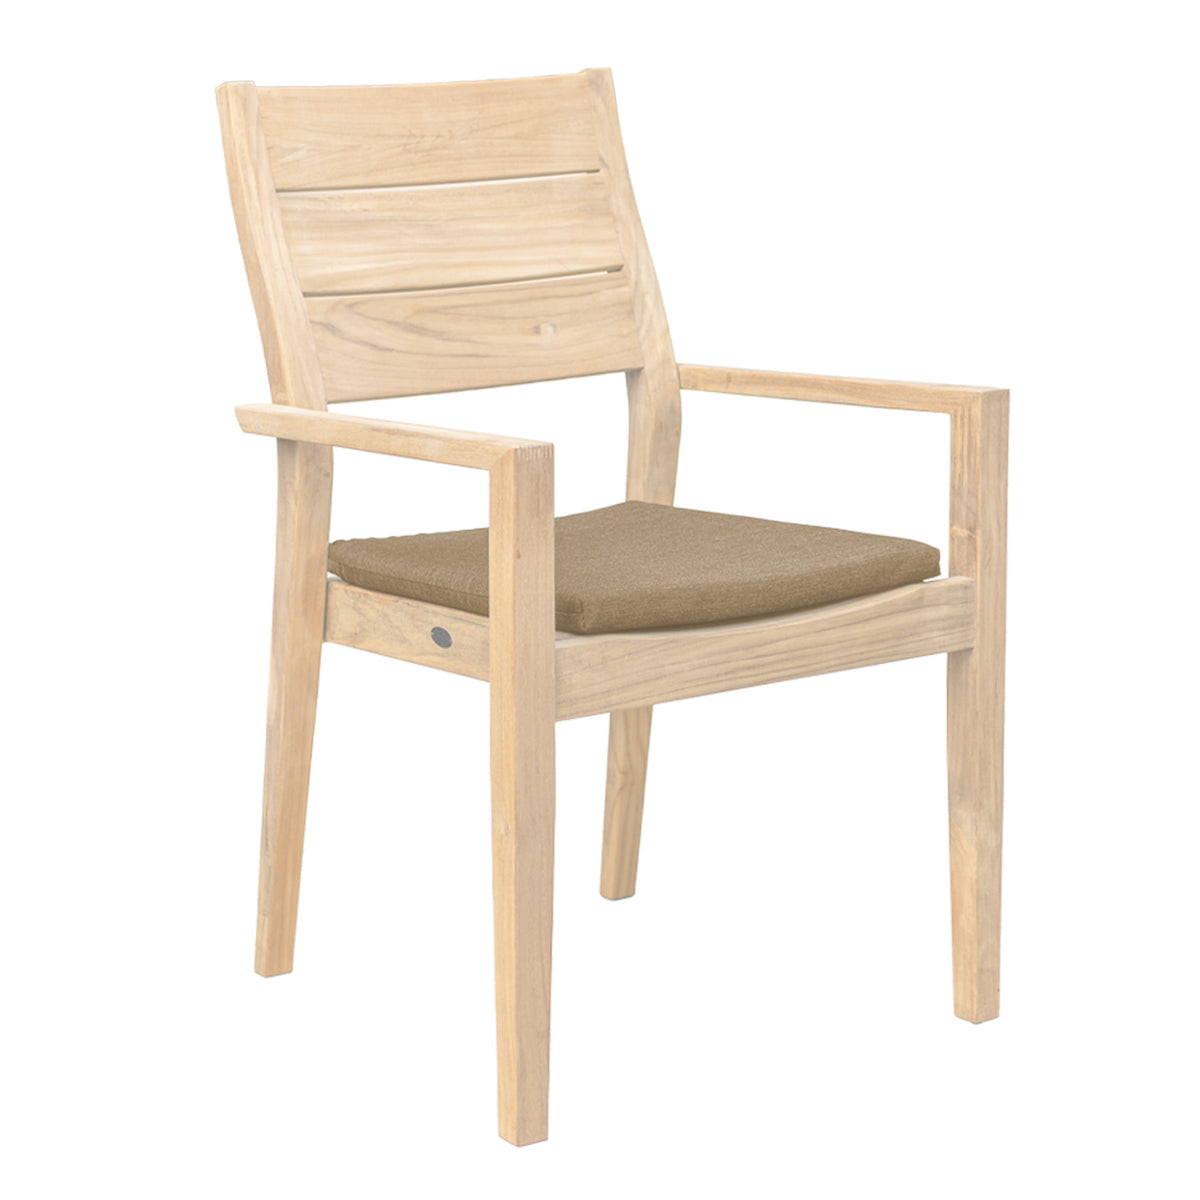 Alexander Rose Roble High Back Chair Seat Pad - Oatmeal